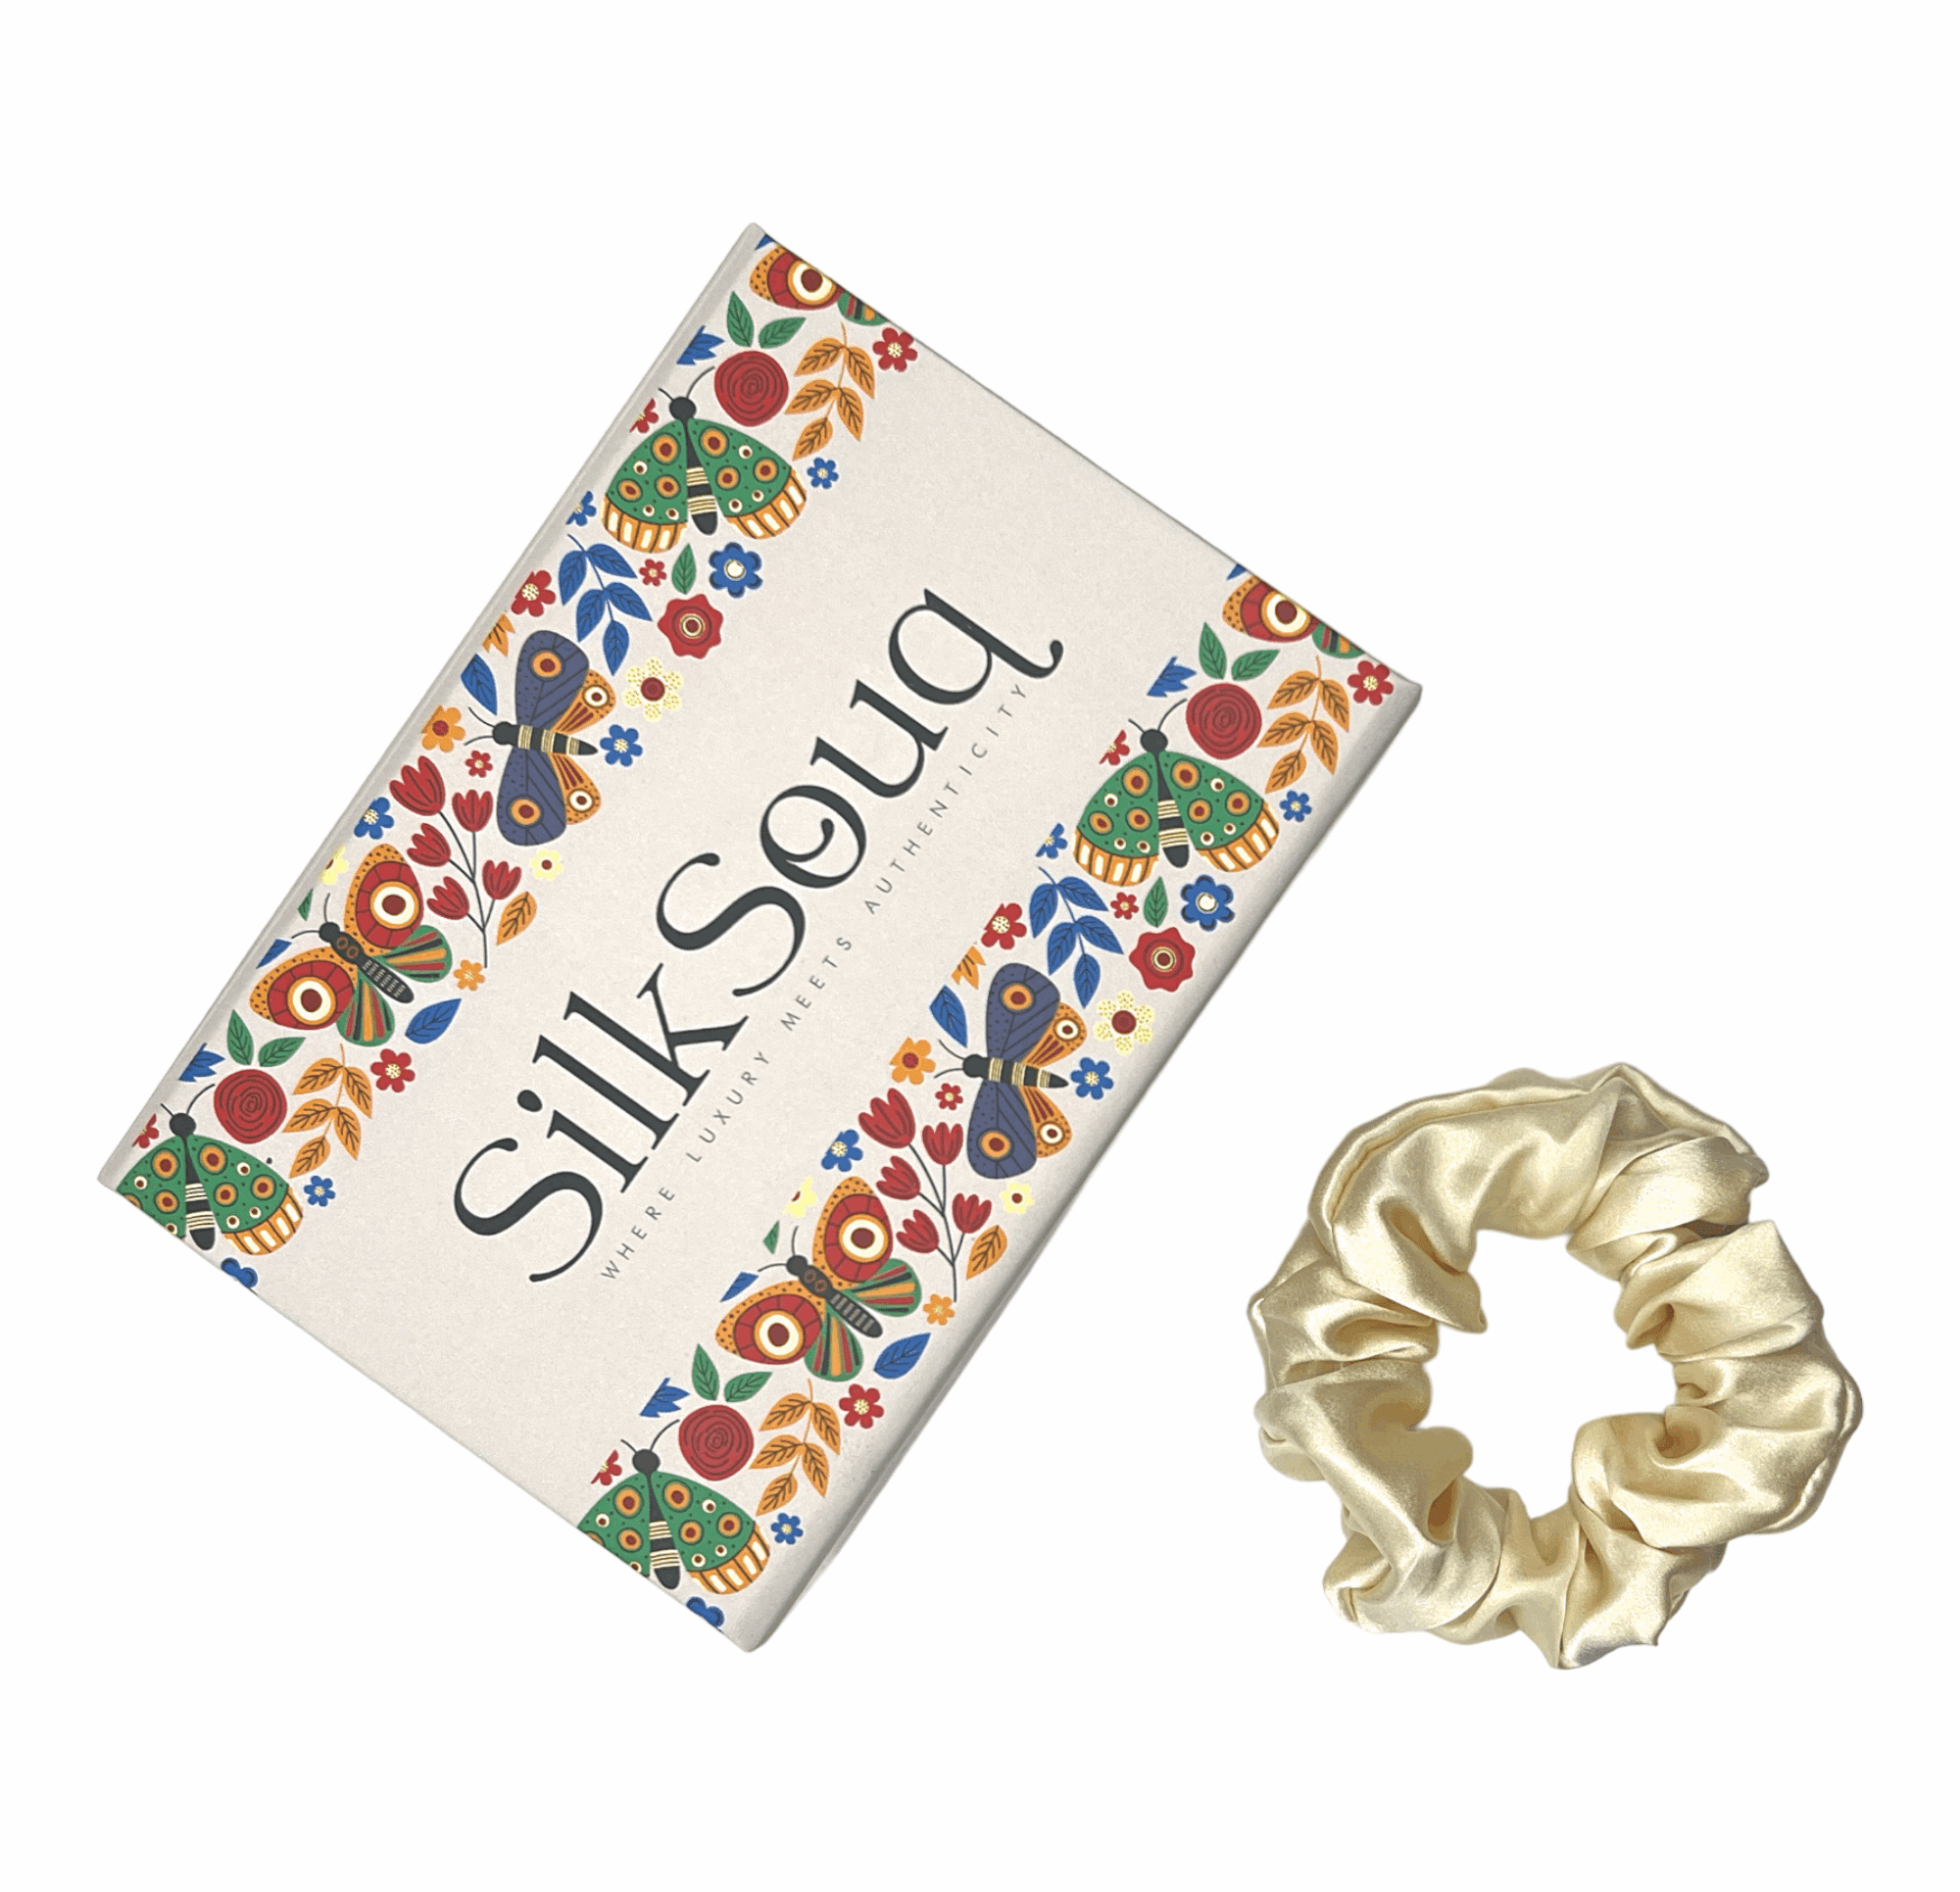 Pure Mulberry Silk Scrunchies From Silksouq & Silksouk, Also Known As Silk Souq In Uae